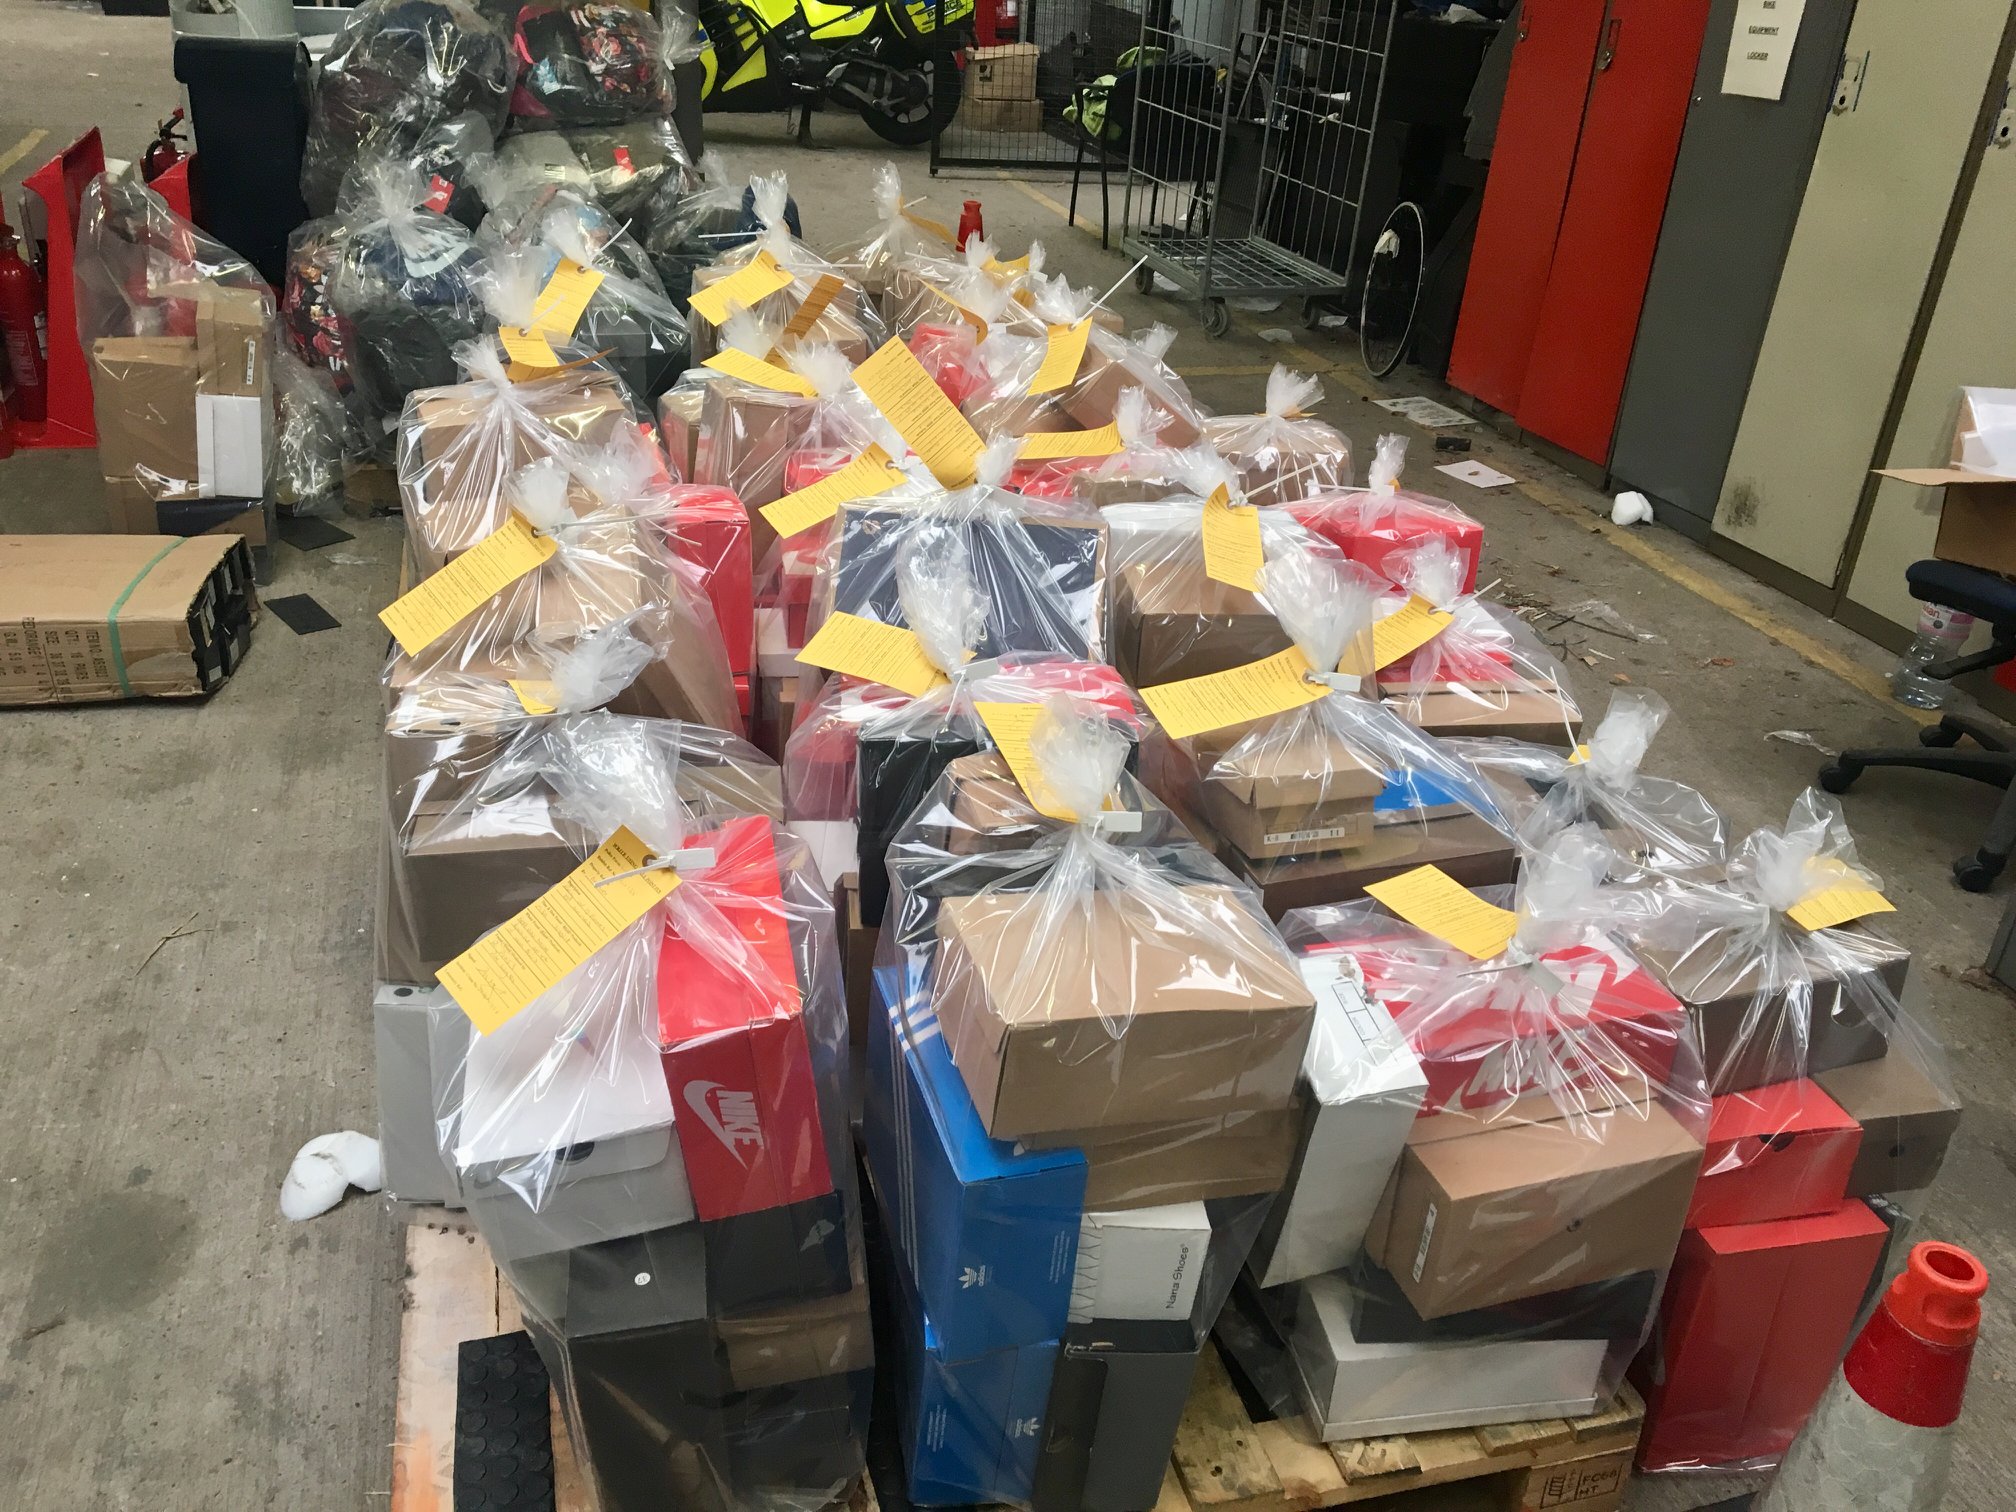 Among the items seized were 400 pairs of trainers, football shirts, jackets, perfumes, hair straighteners and watches. Photo: West Mercia Police